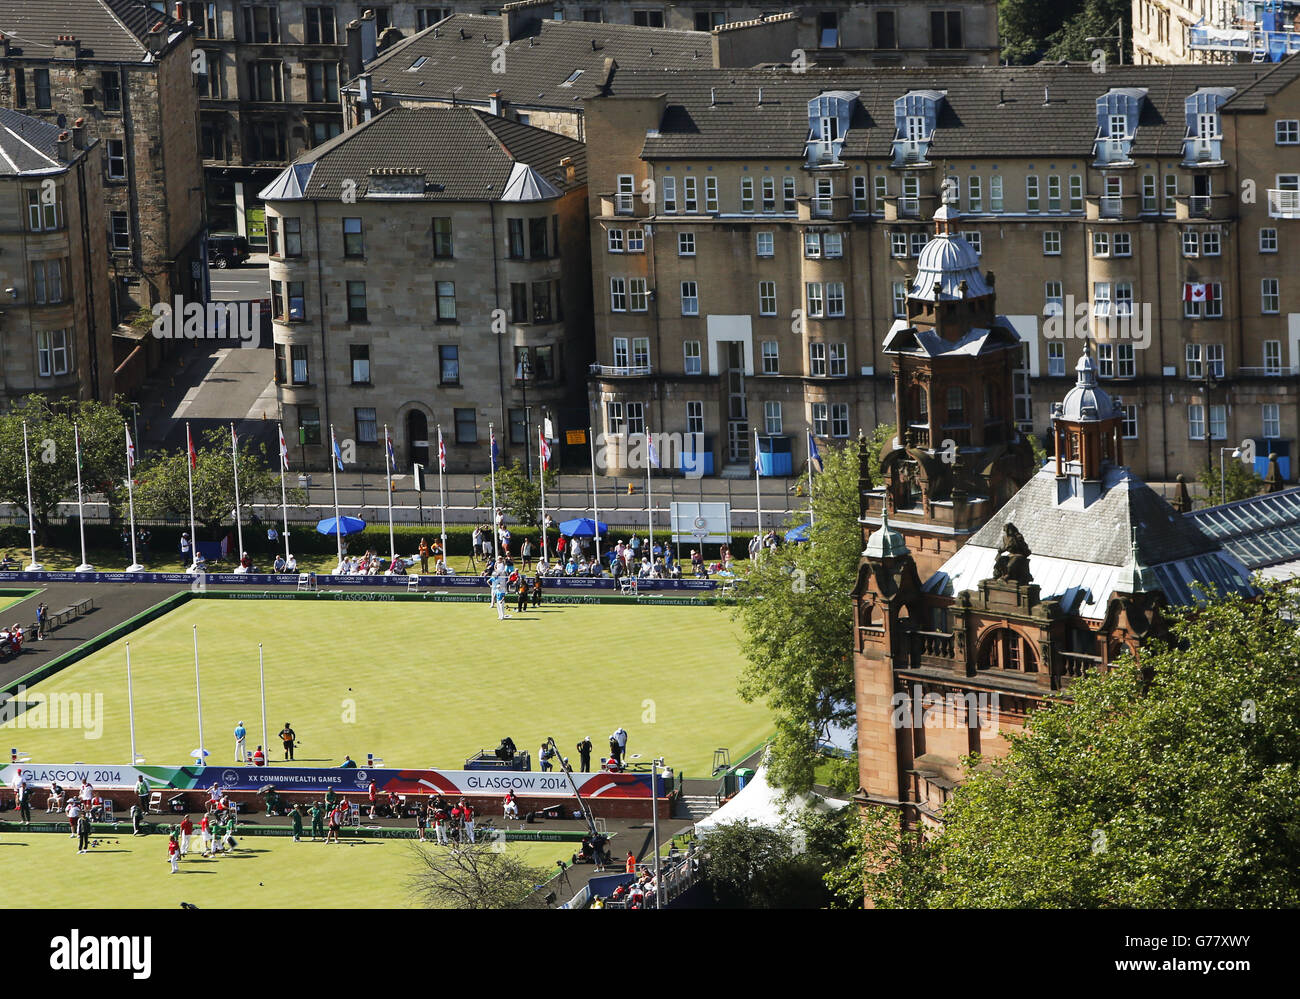 Sport - 2014 Commonwealth Games - Day Two. The Kelvingrove Lawn Bowls Centre during the 2014 Commonwealth Games in Glasgow, Scotland. Stock Photo